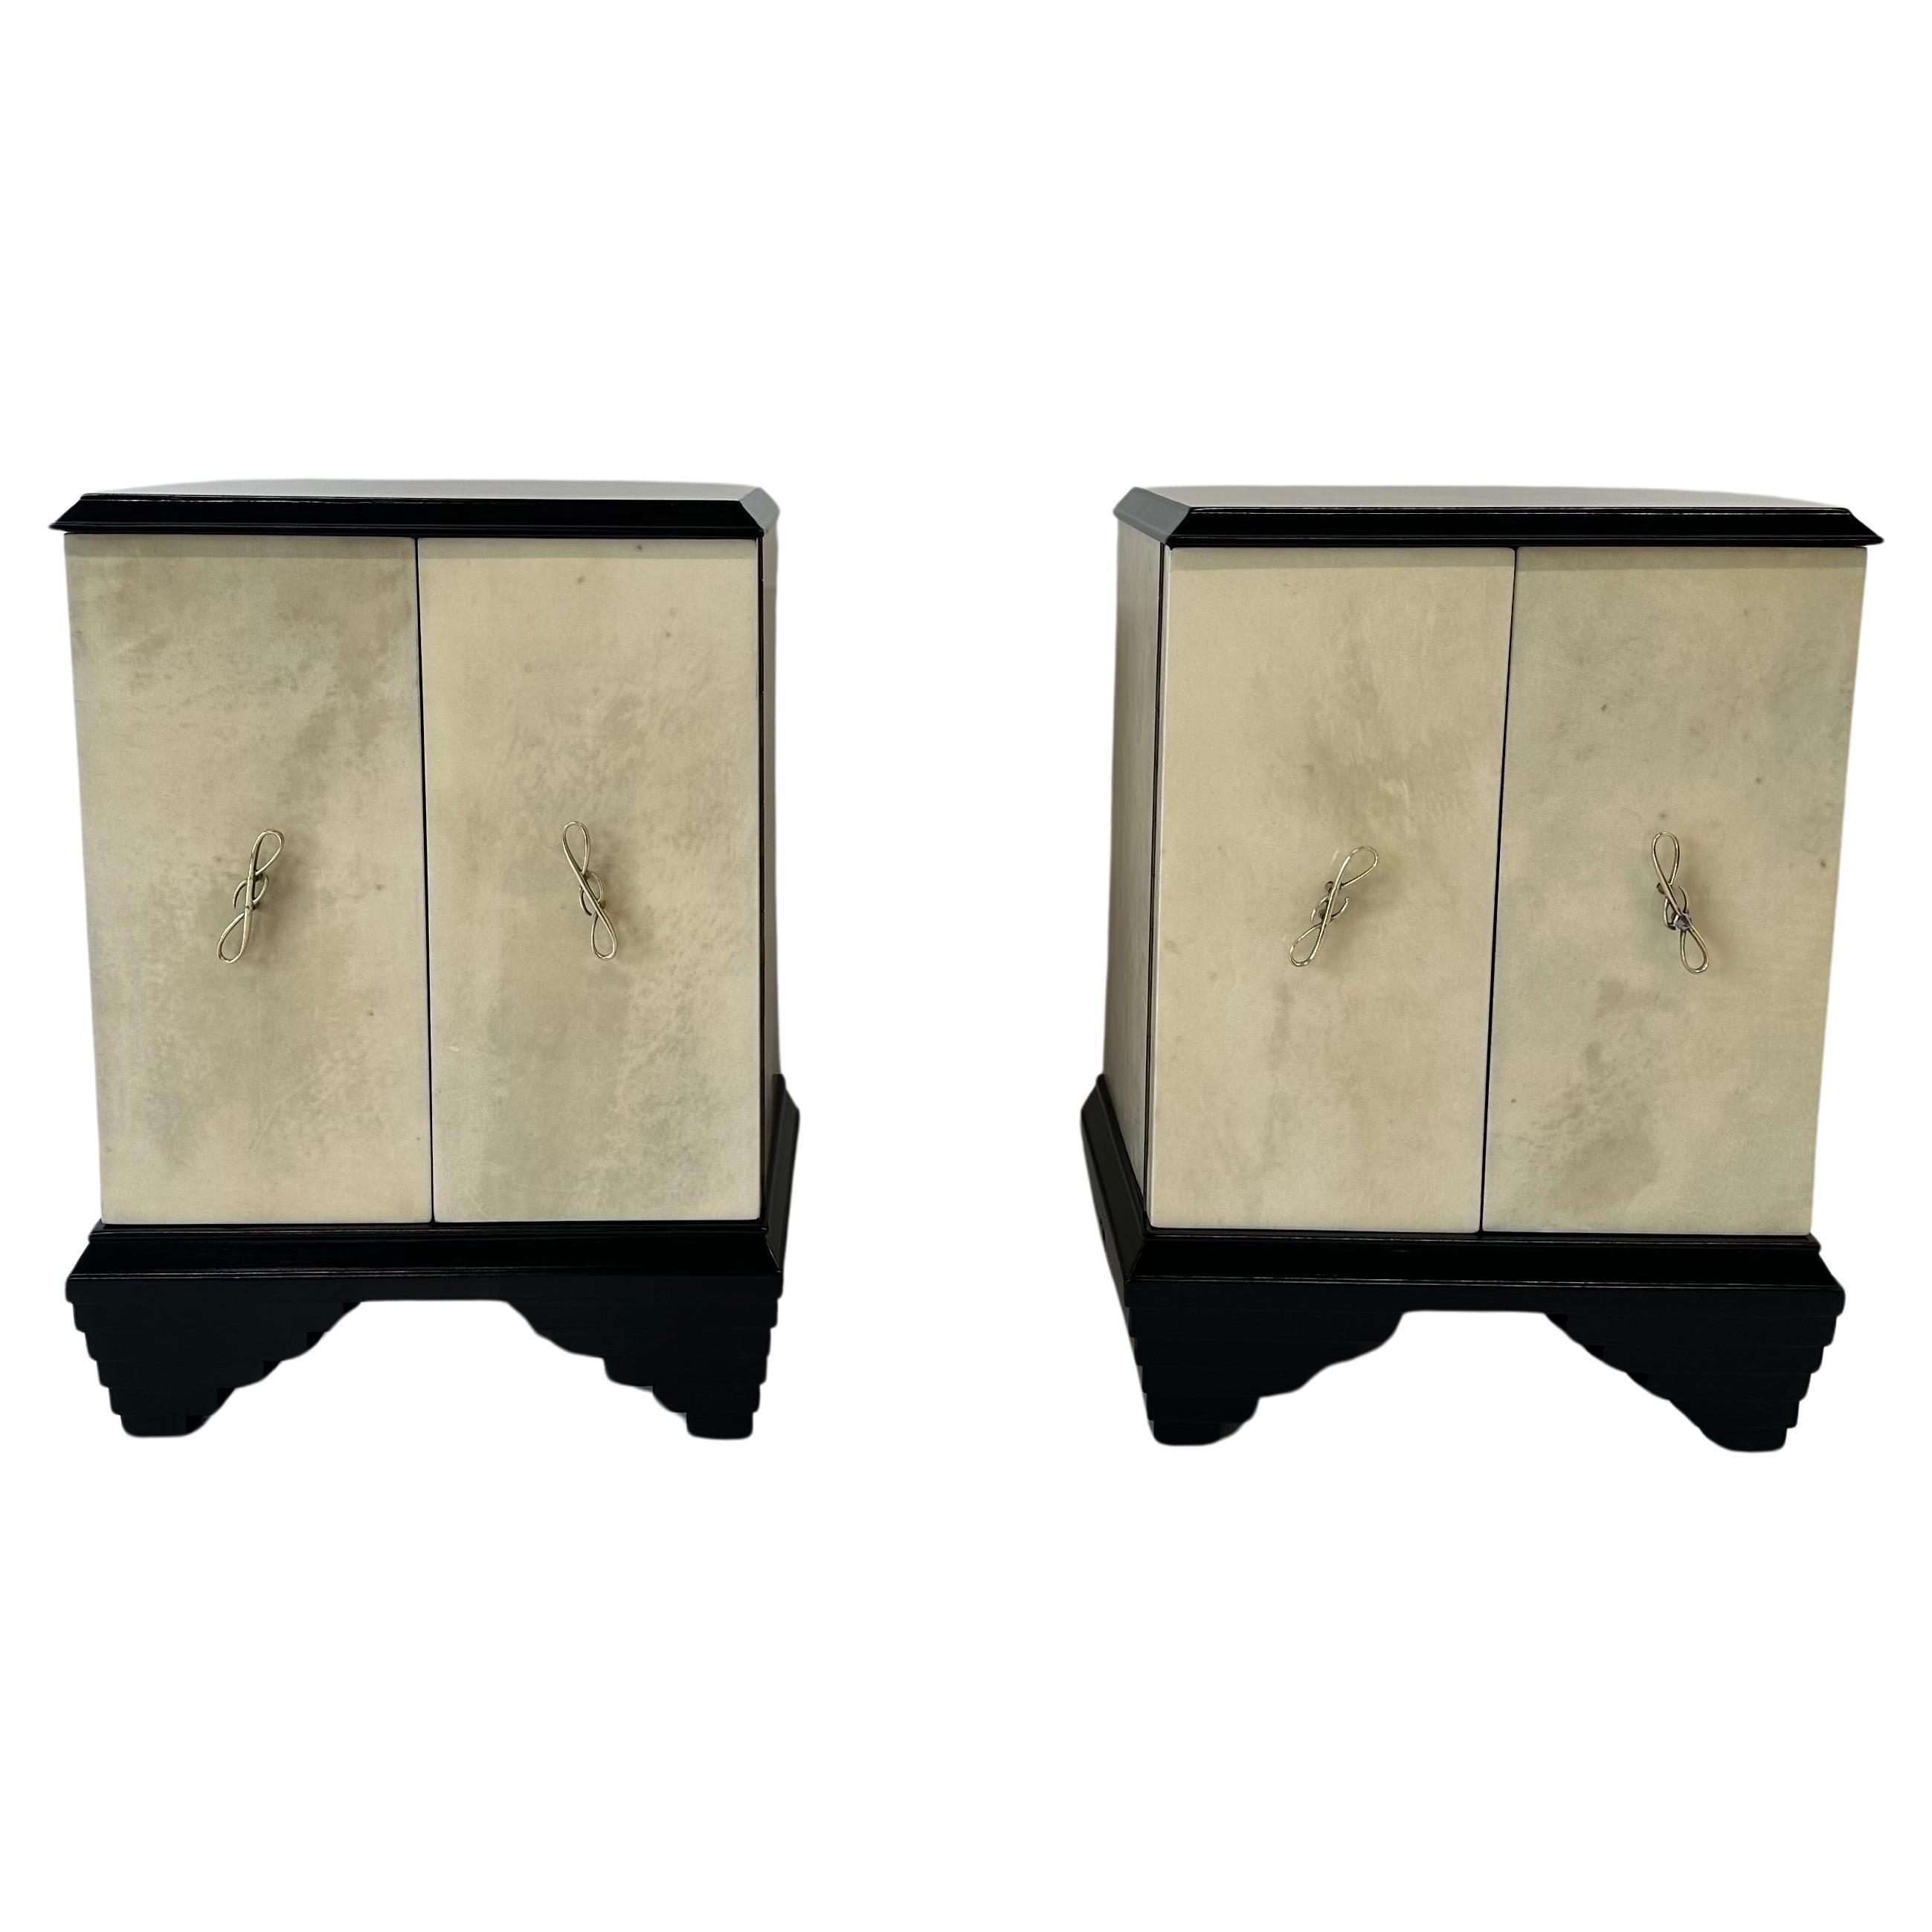 Italian Art Deco Parchment and Black Lacquer Pair of Nightstands, 1930s  For Sale